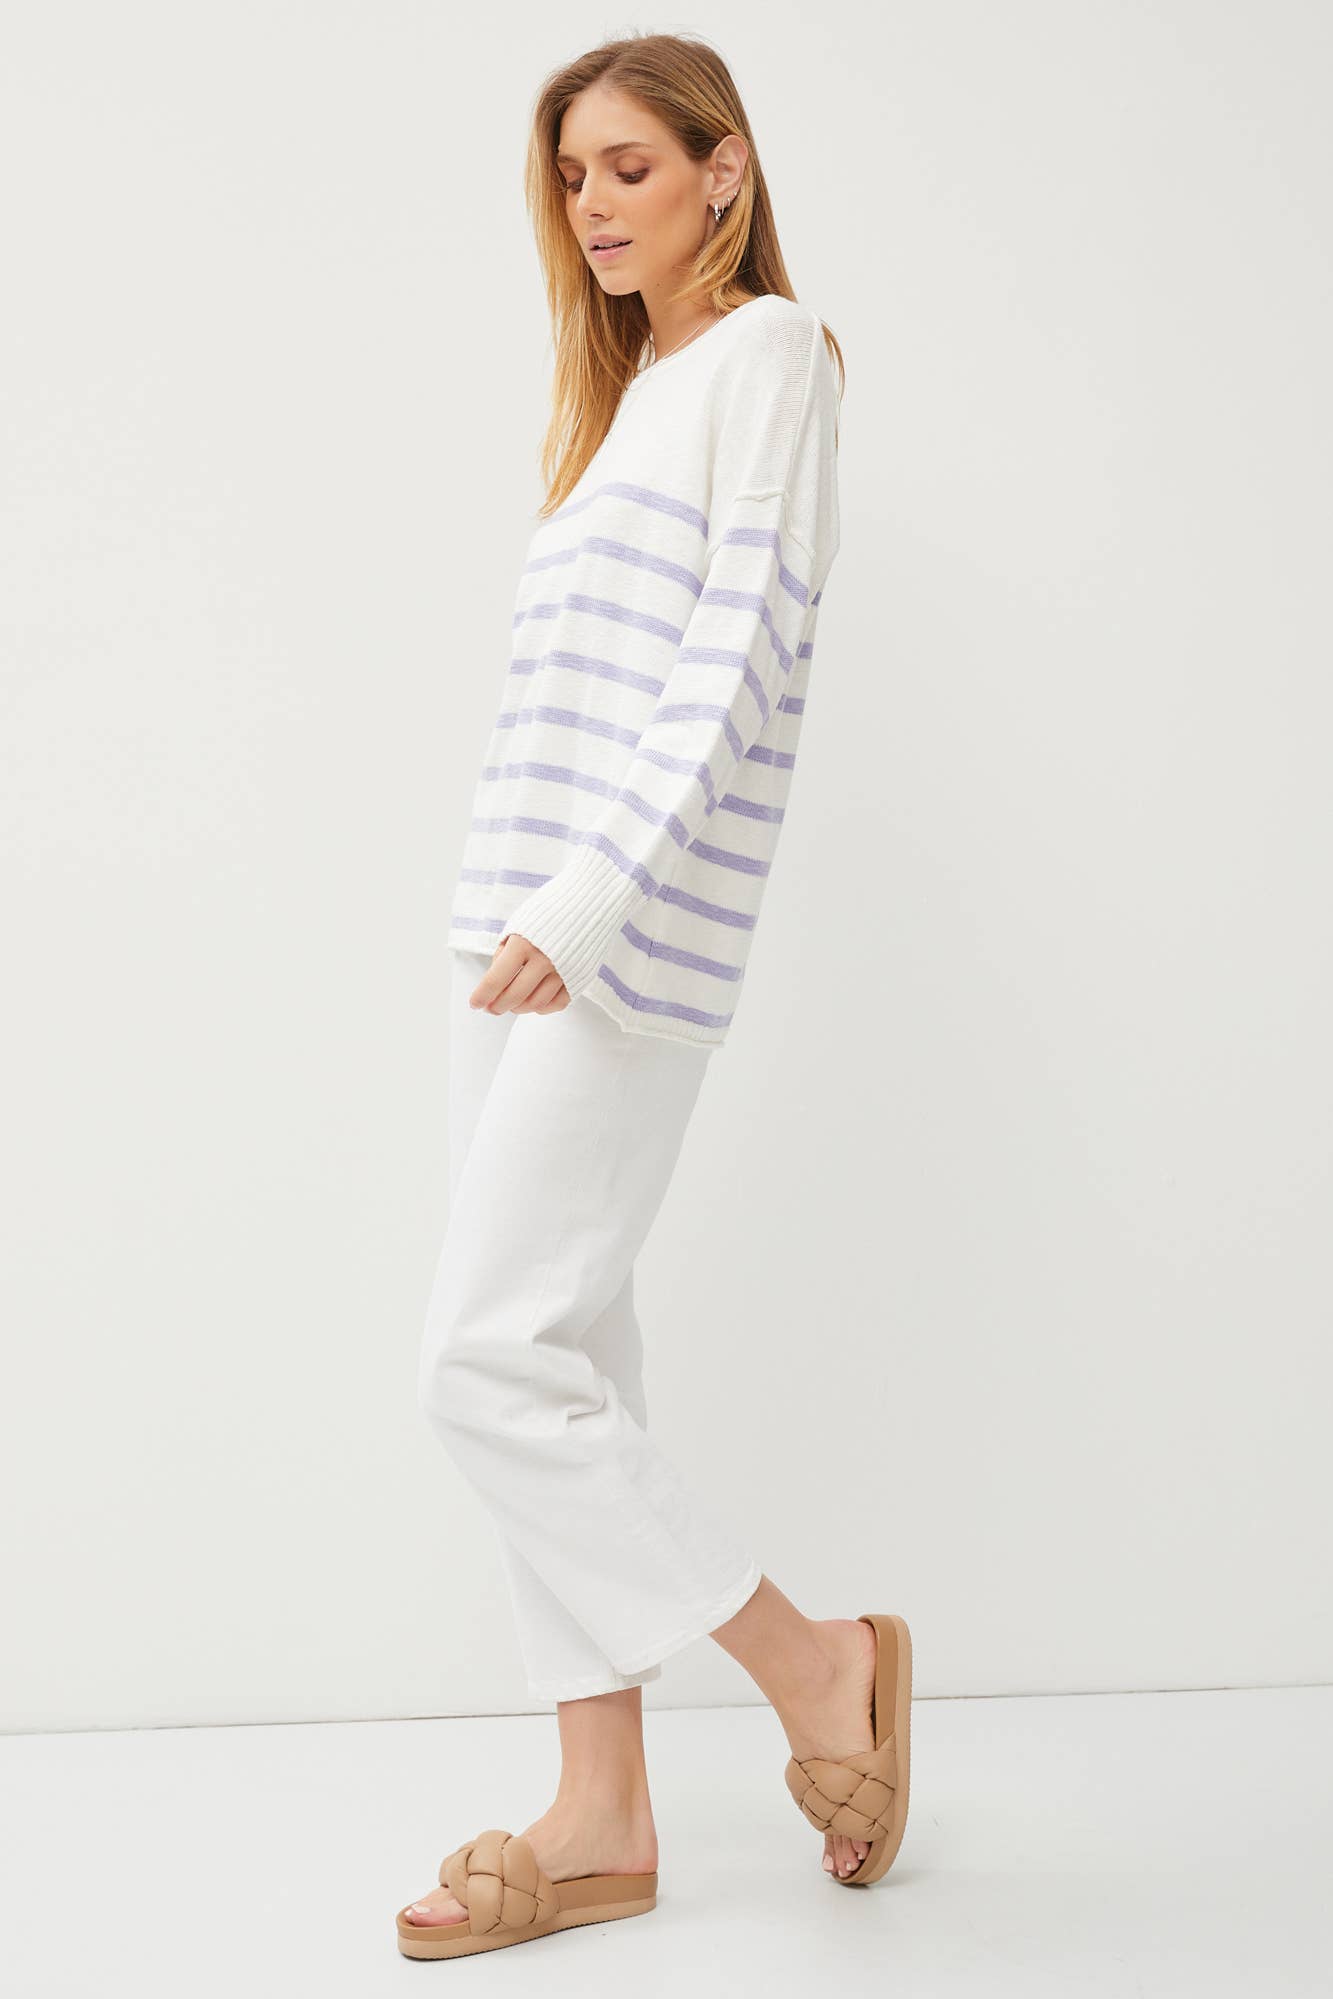 Alexis - EXPOSED SEAM SHOULDER STRIPED PULLOVER SWEATER